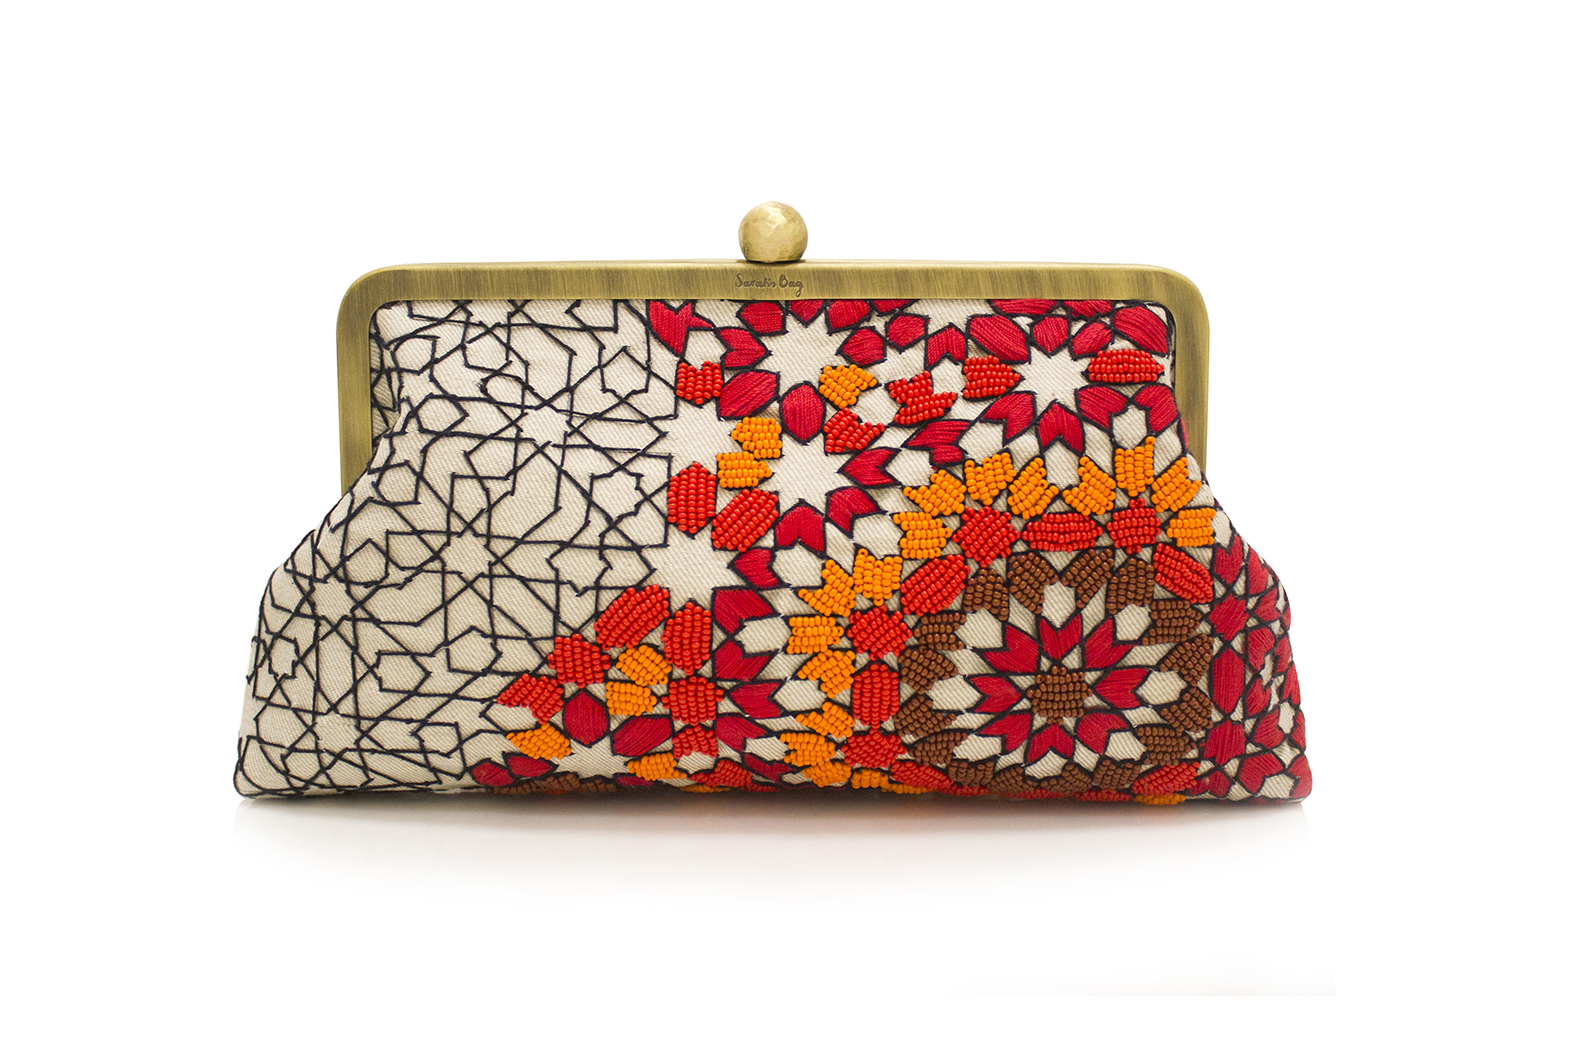 Turn Heads With A LimitedEdition Piece From Sarahs Bag That Will Help  Empower Women  About Her